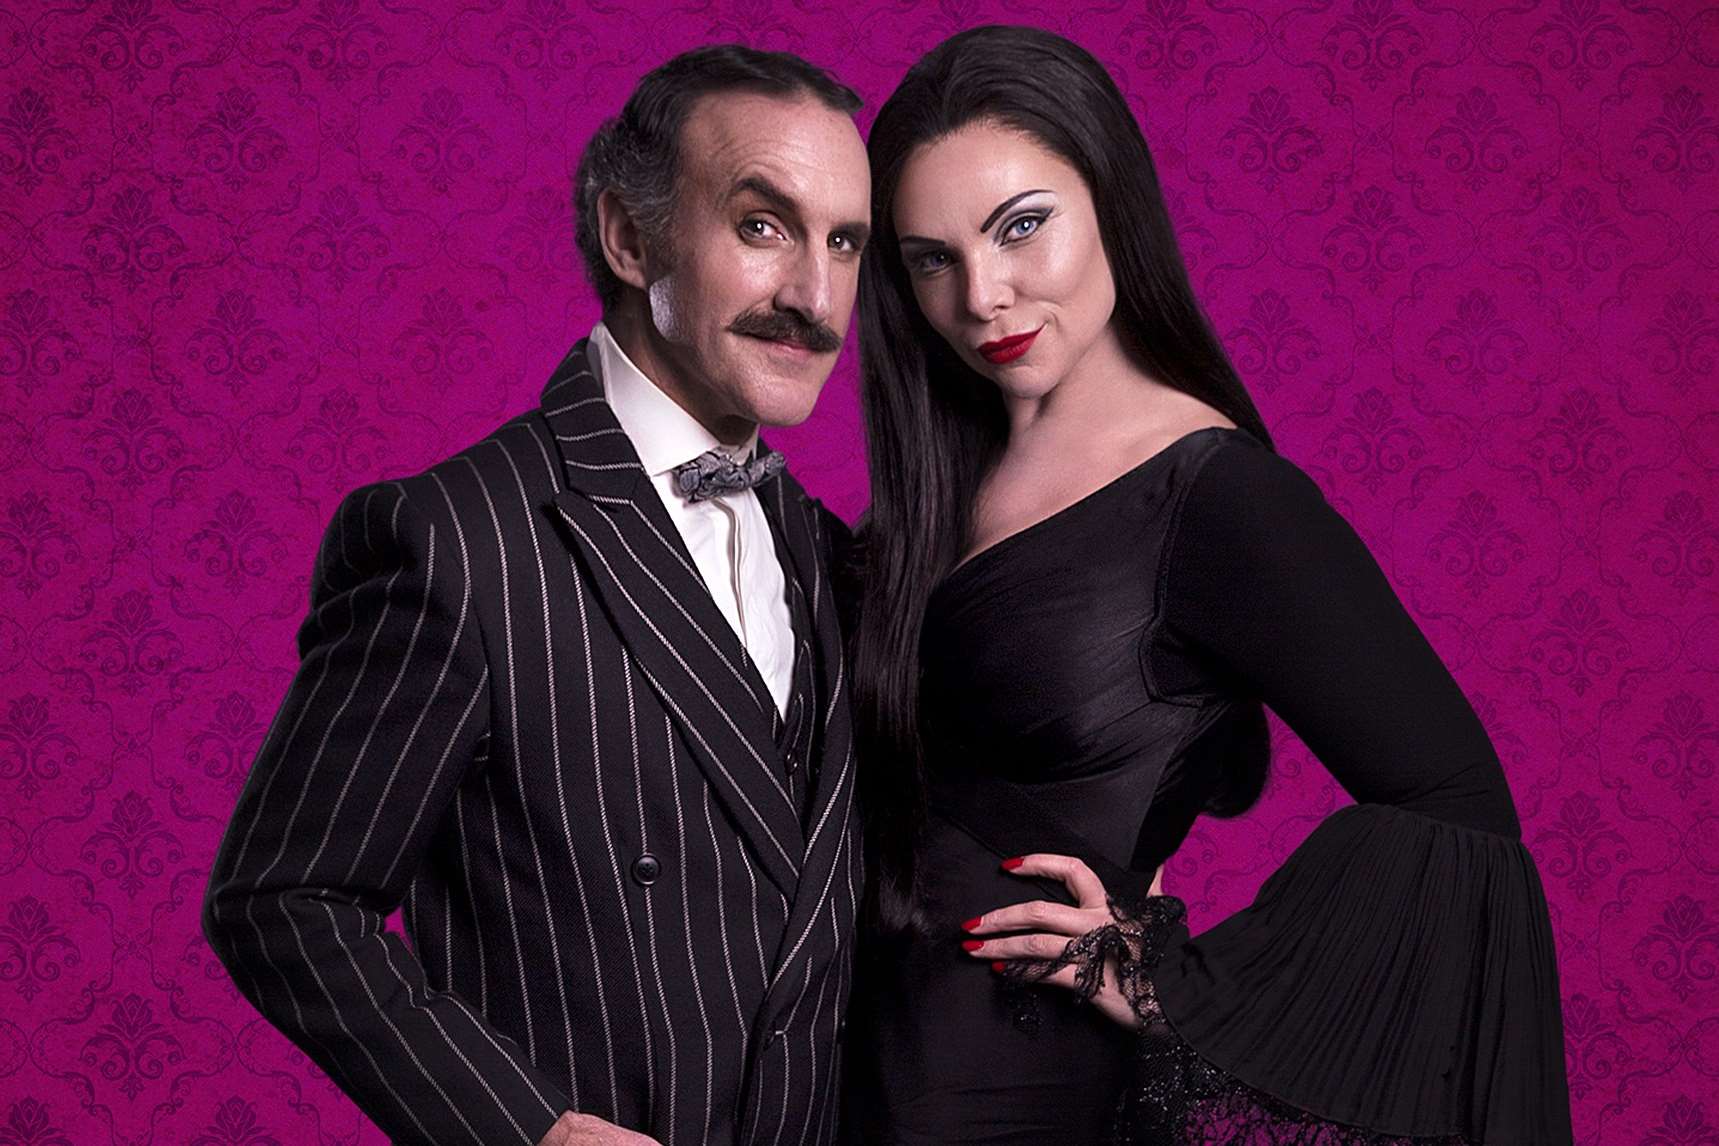 Cameron Blakeley as Gomez and Samantha Womack as Morticia